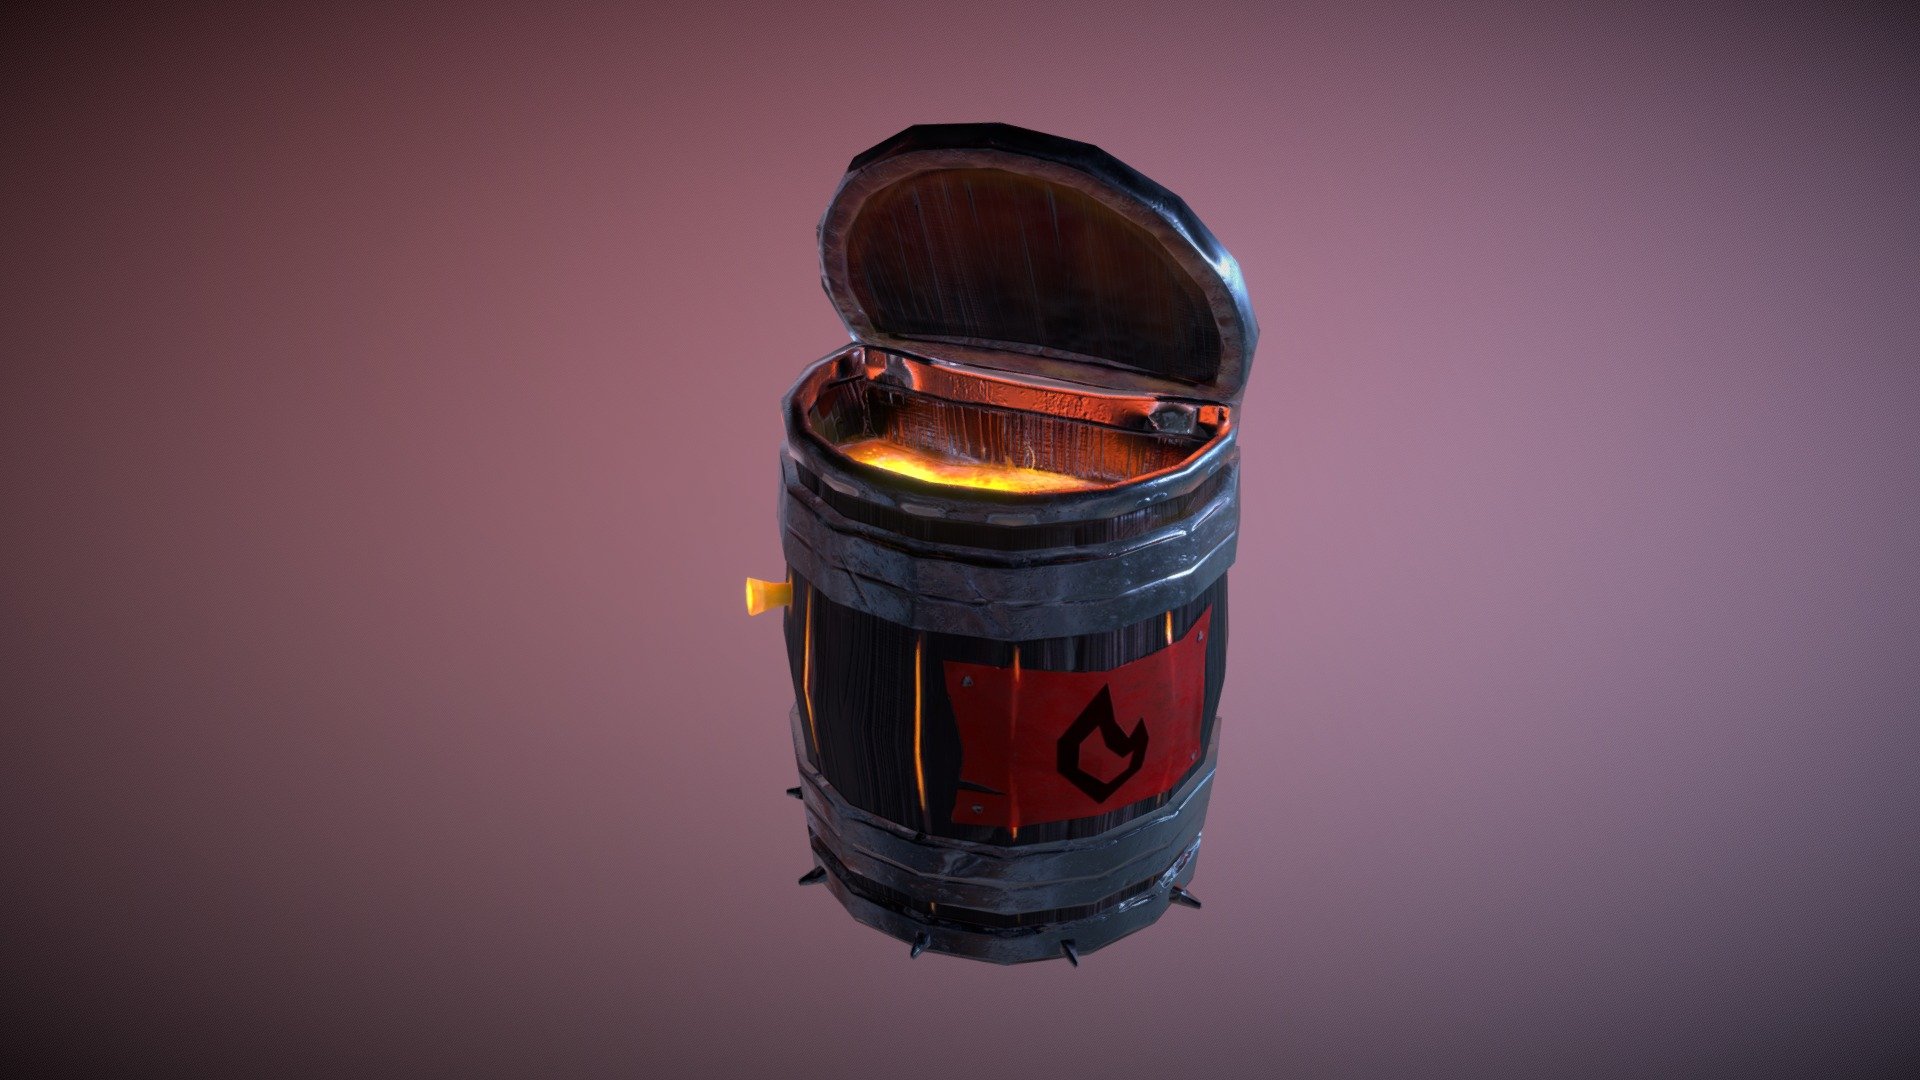 Fan Art for a new type of Barrel for Sea of Thieves, Original concept by Scott Puckett. https://www.artstation.com/scottpuckett

The concept is, this barrel would have the power of a volcano and be highly unstable. Very rare and found only in the Devils Roar area of the map. The Barrel upon exploding would release a super-powerful volcanic blast which would not only send volcanic rock into the air at long distance but would also turn the water in the surrounding area super hot. Any ships within short distance would be damaged beyond repair and all avatars killed. This barrel is equivalent to a nuke in Sea of Thieves.

A little project to work on my speed, about 8 hours total model, sculpt UV and paint. Maya Model, Zbrush Sculpt, Substanca painter for texturing 3d model